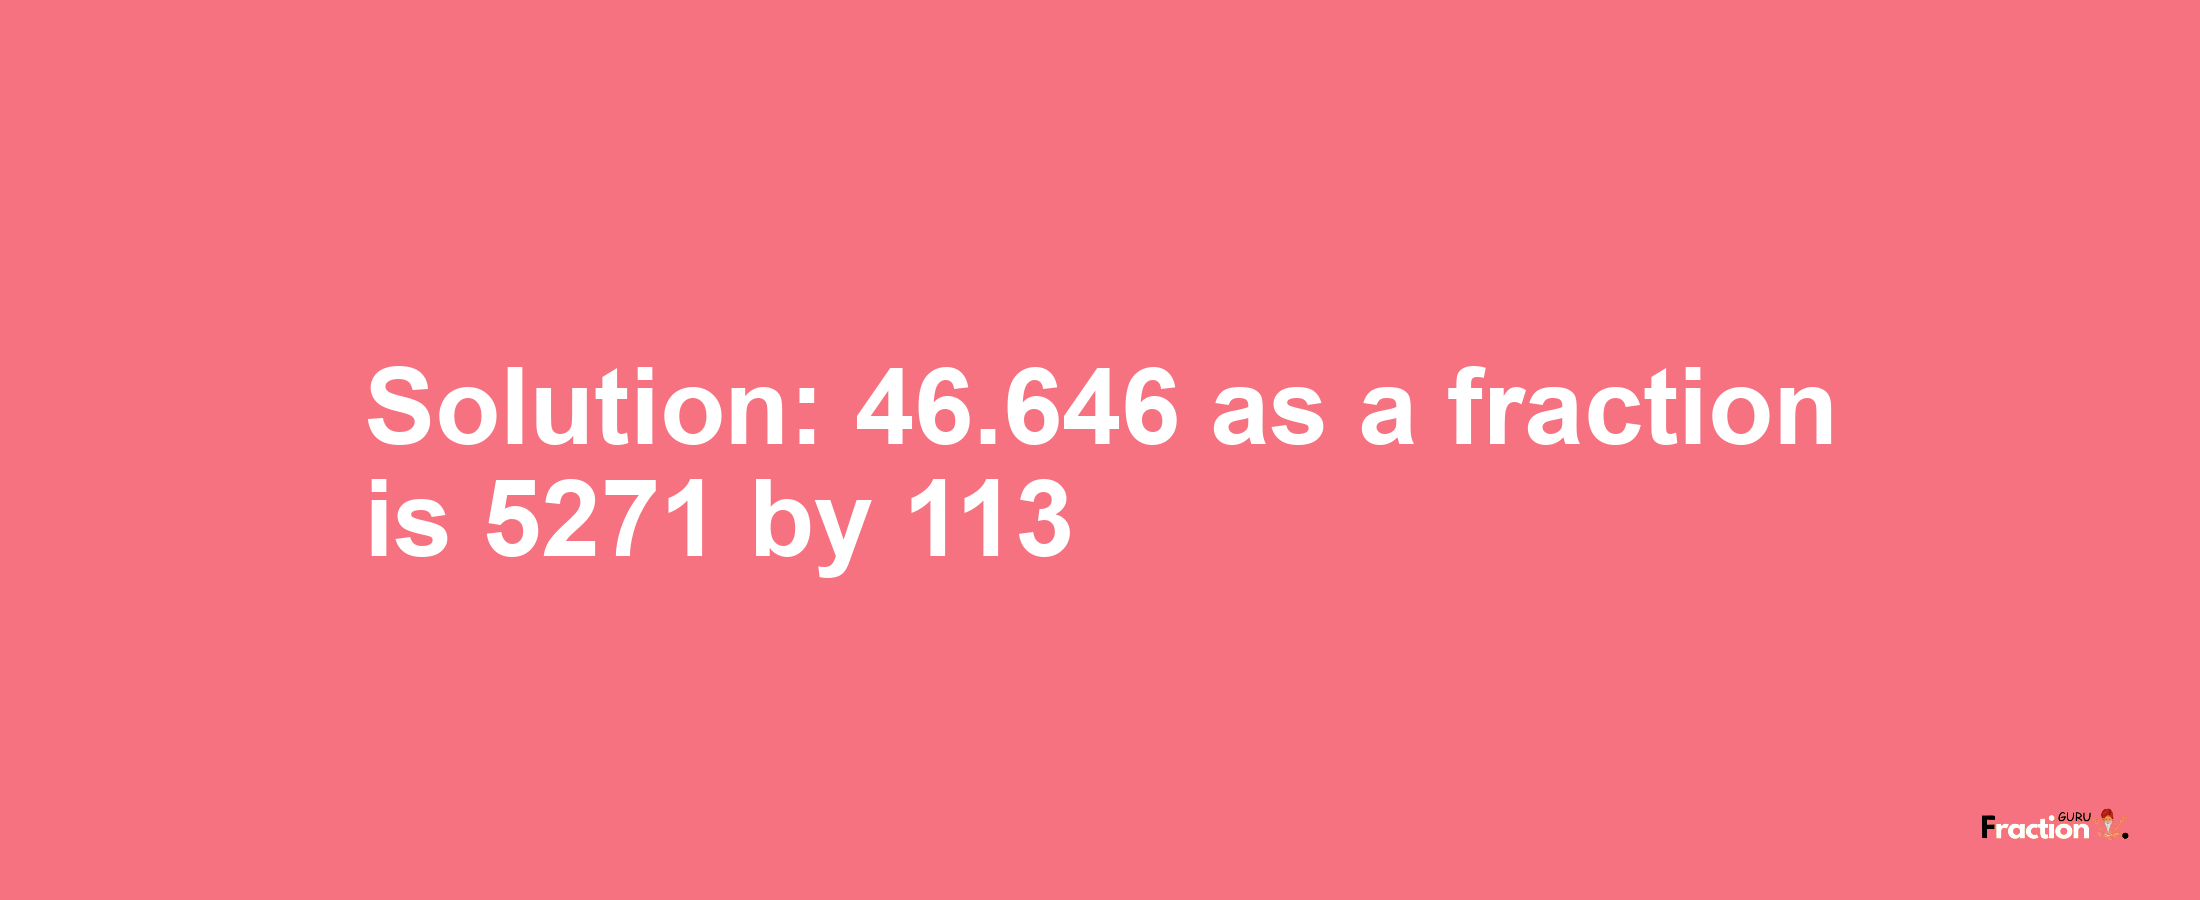 Solution:46.646 as a fraction is 5271/113